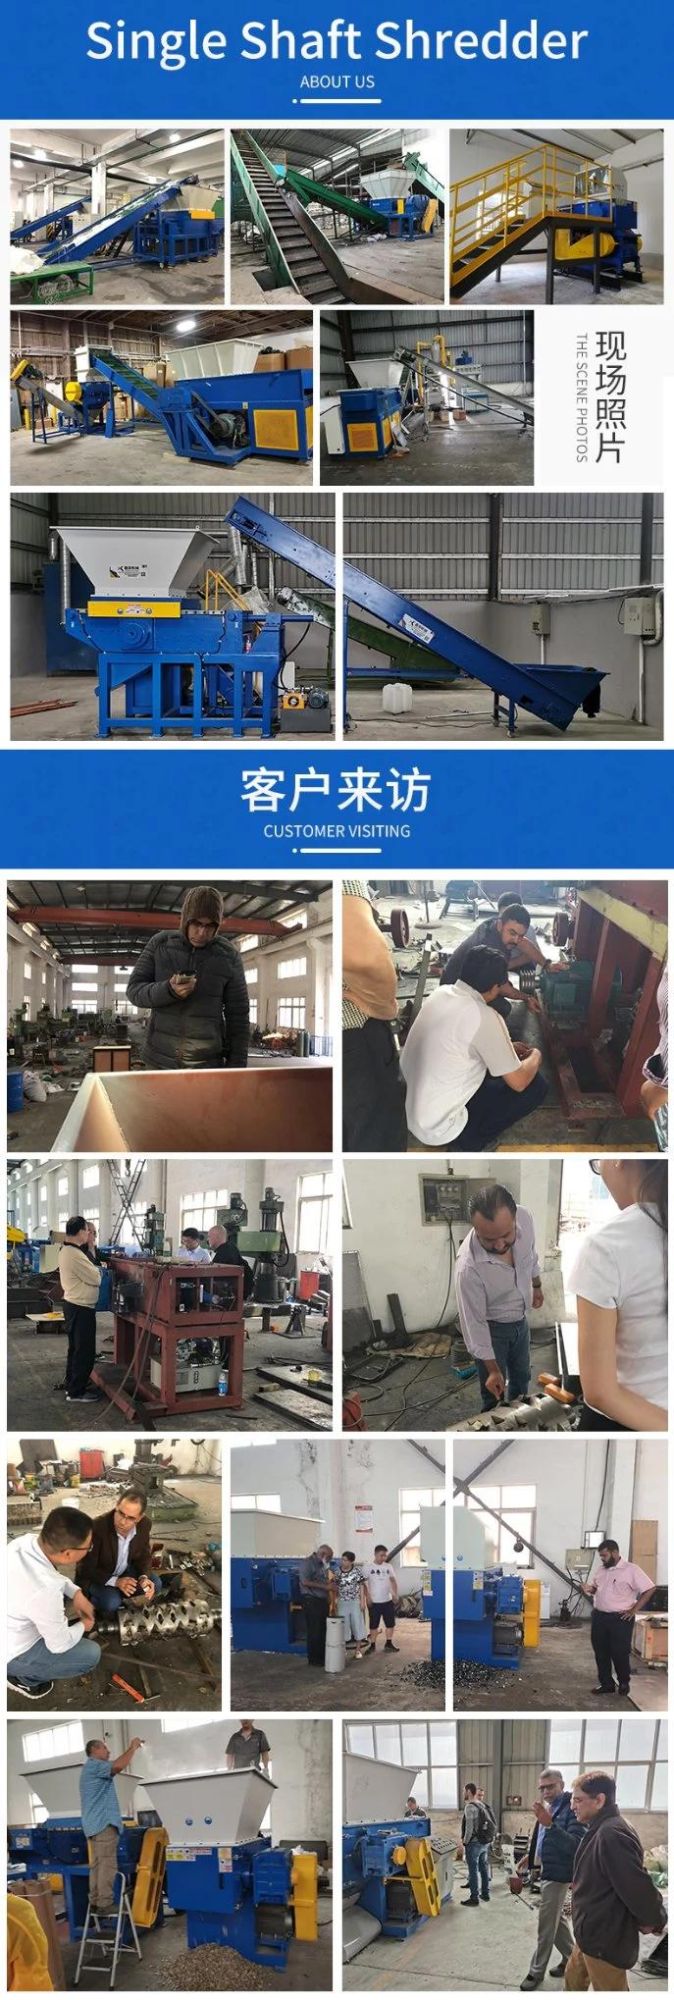 Plastic Crusher Machine for Plastic Recycling Like PP Battery Cover/Box/Board/Sheet/Plate